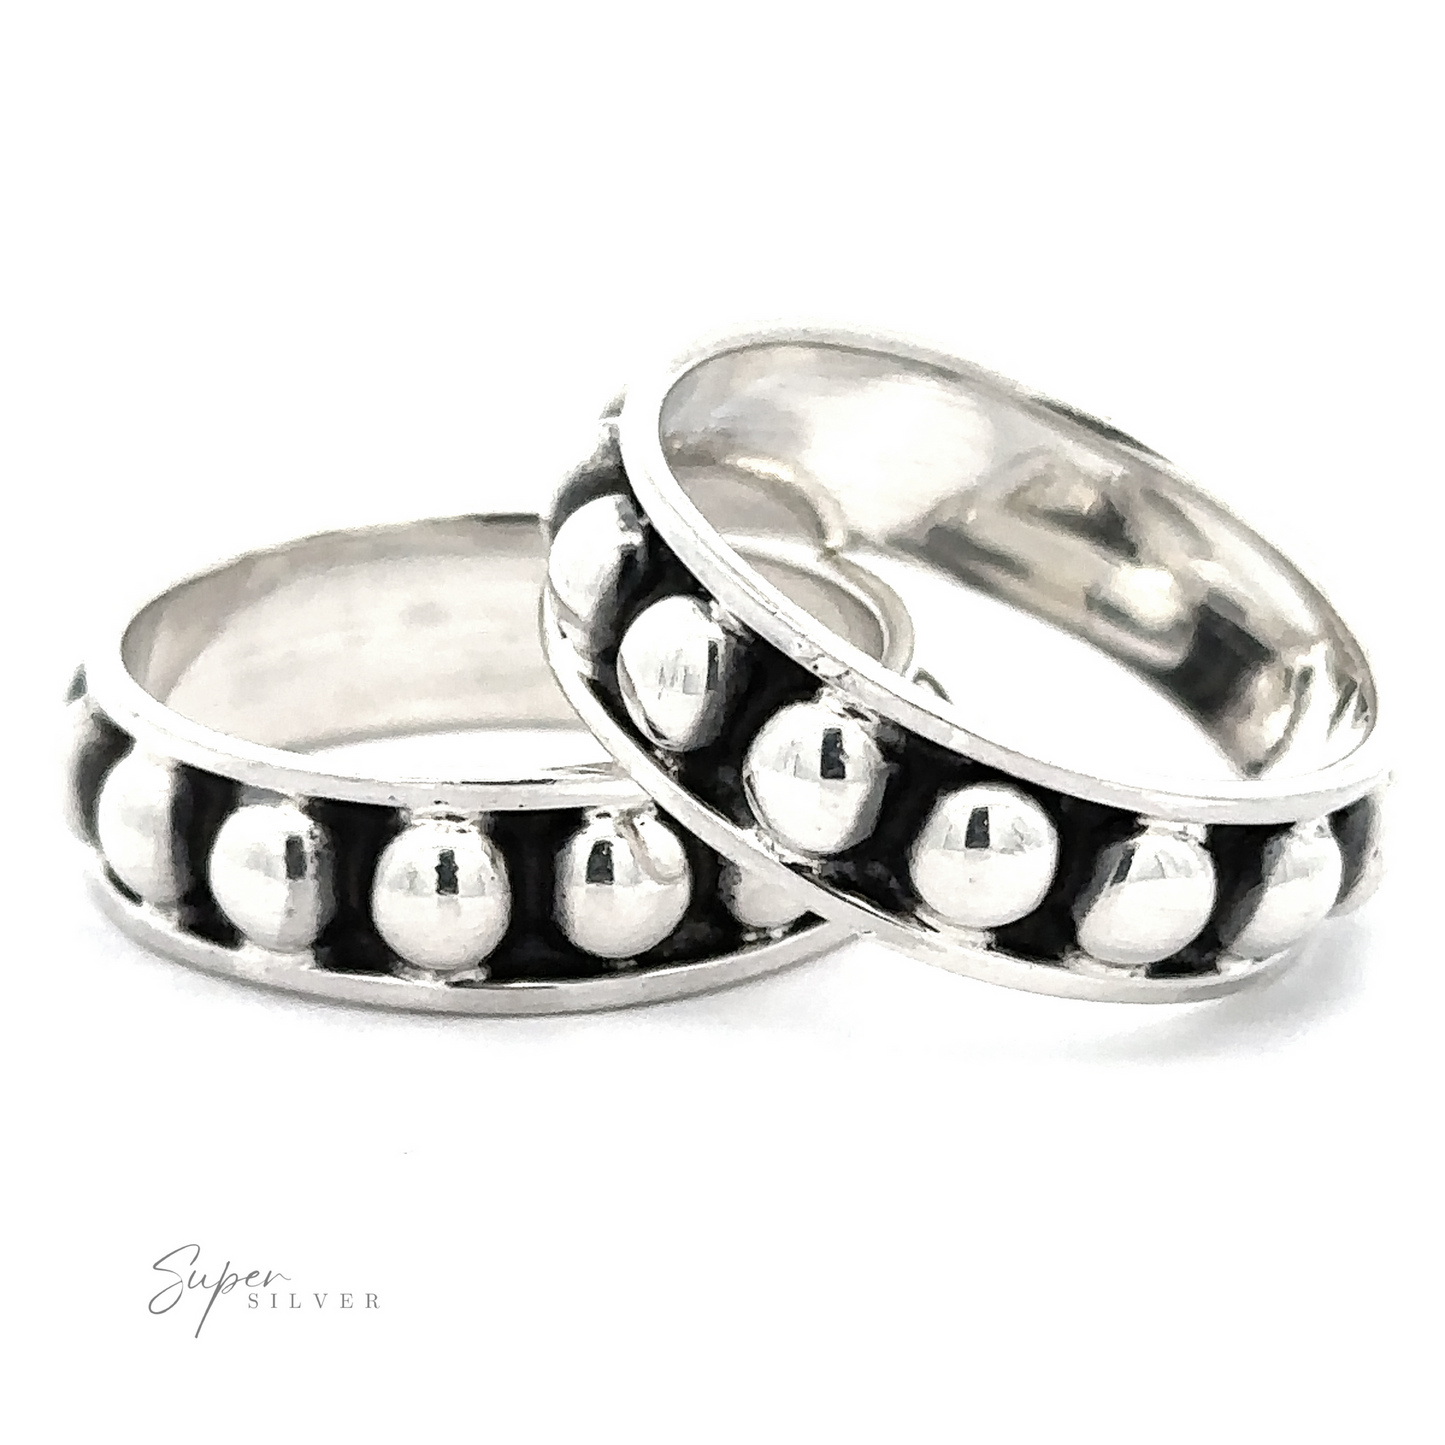 Two thick Oxidized Ball Band rings with a polished finish, displayed against a white background.